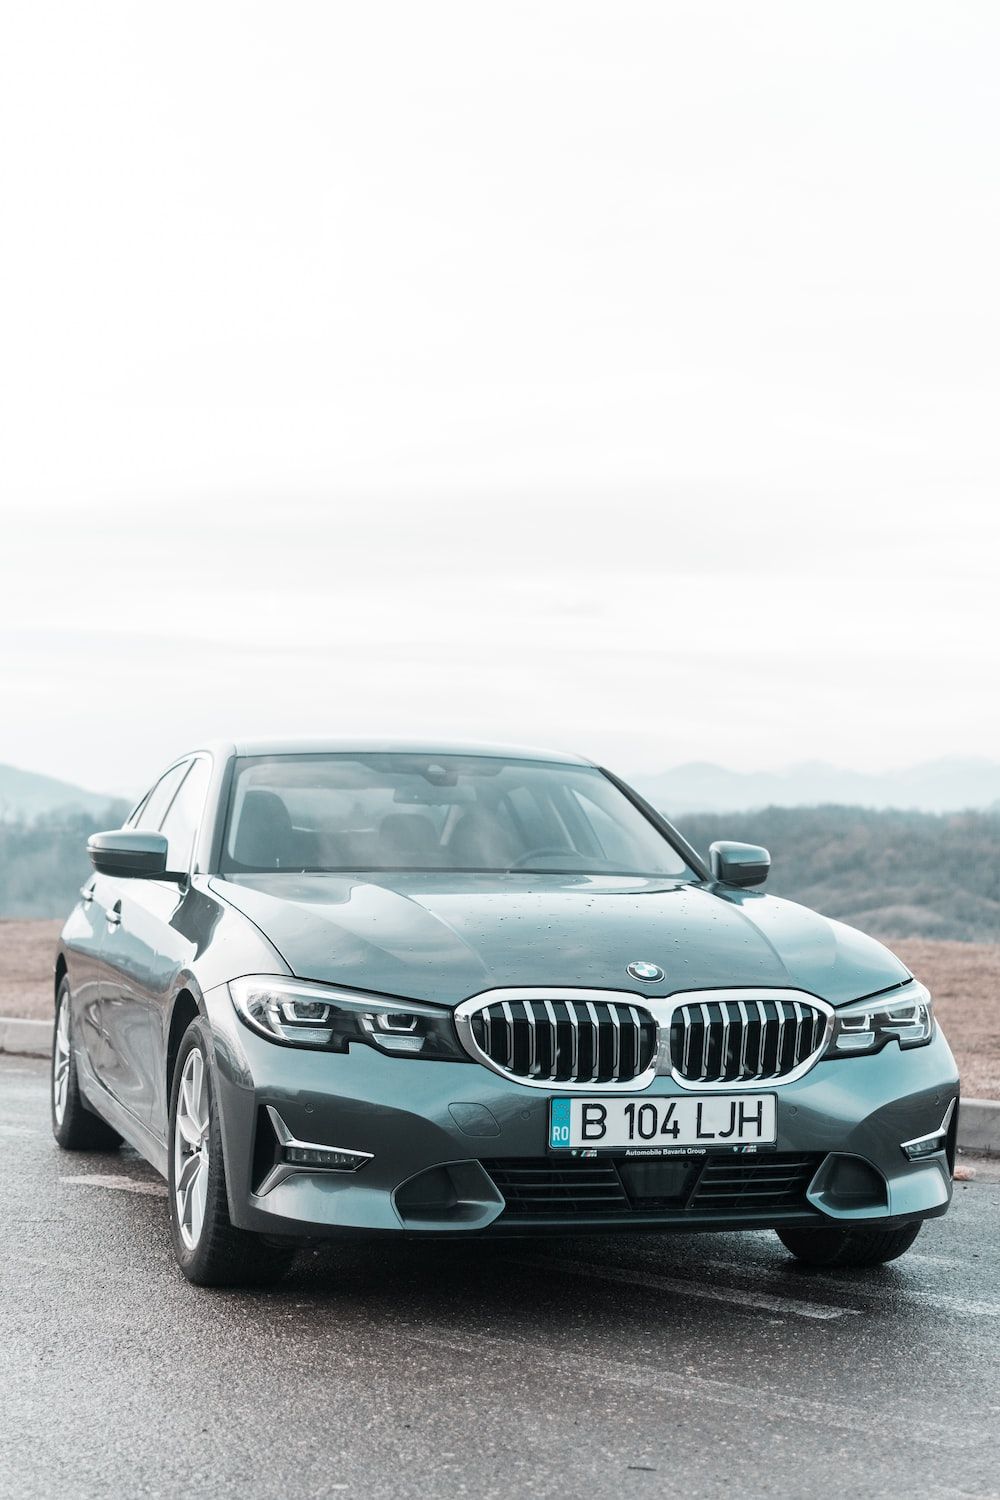 Bmw 3 Series Picture. Download Free Image